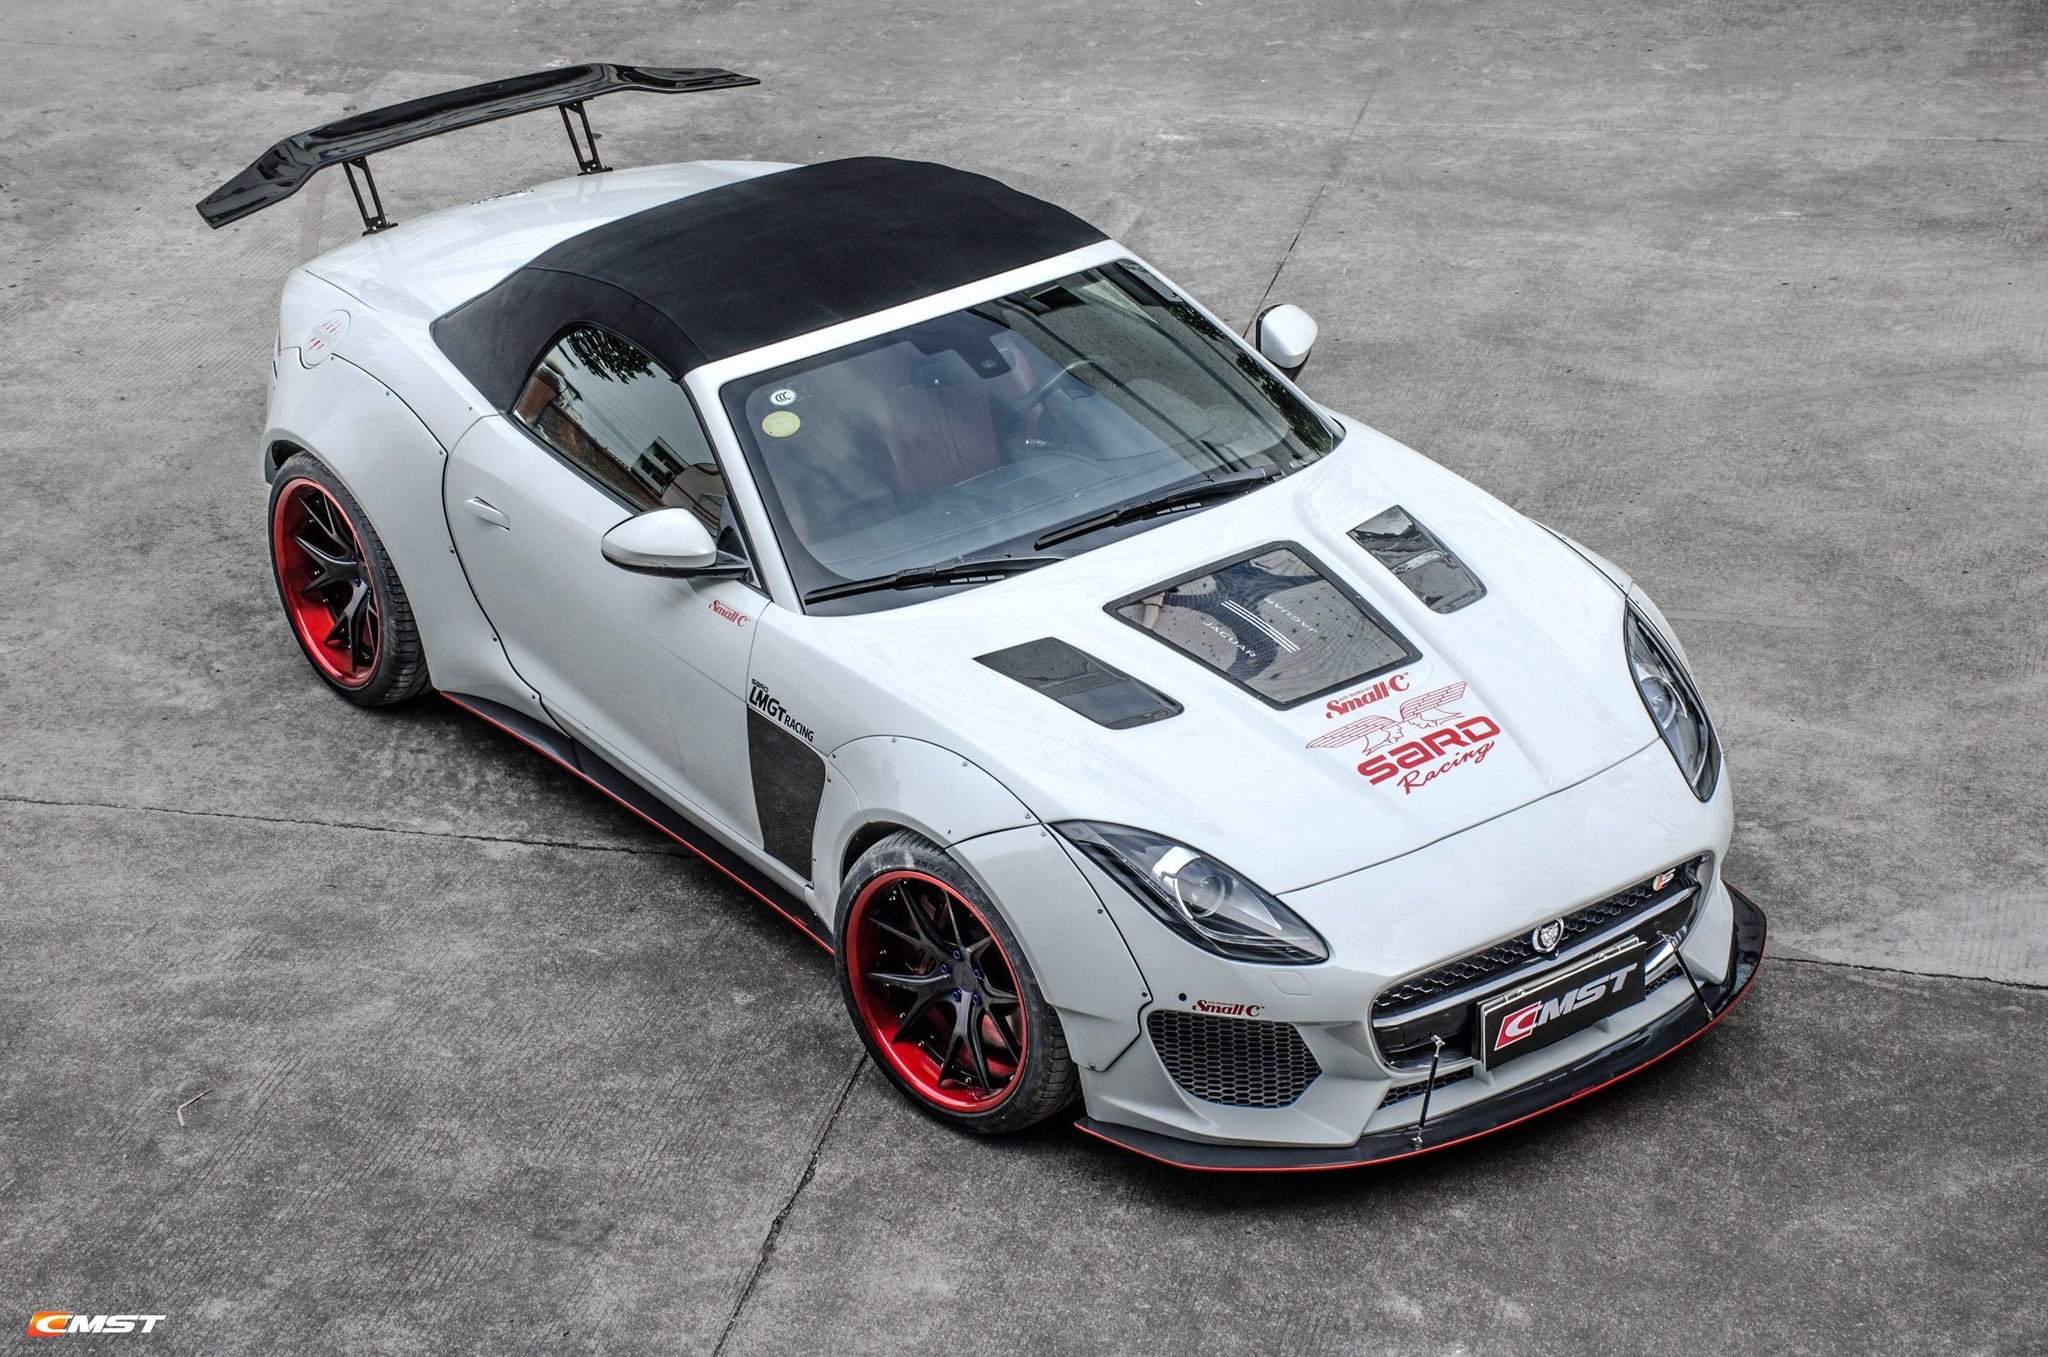 Check our price and buy CMST Carbon Fiber WideBody Kit set for Jaguar F-Type!